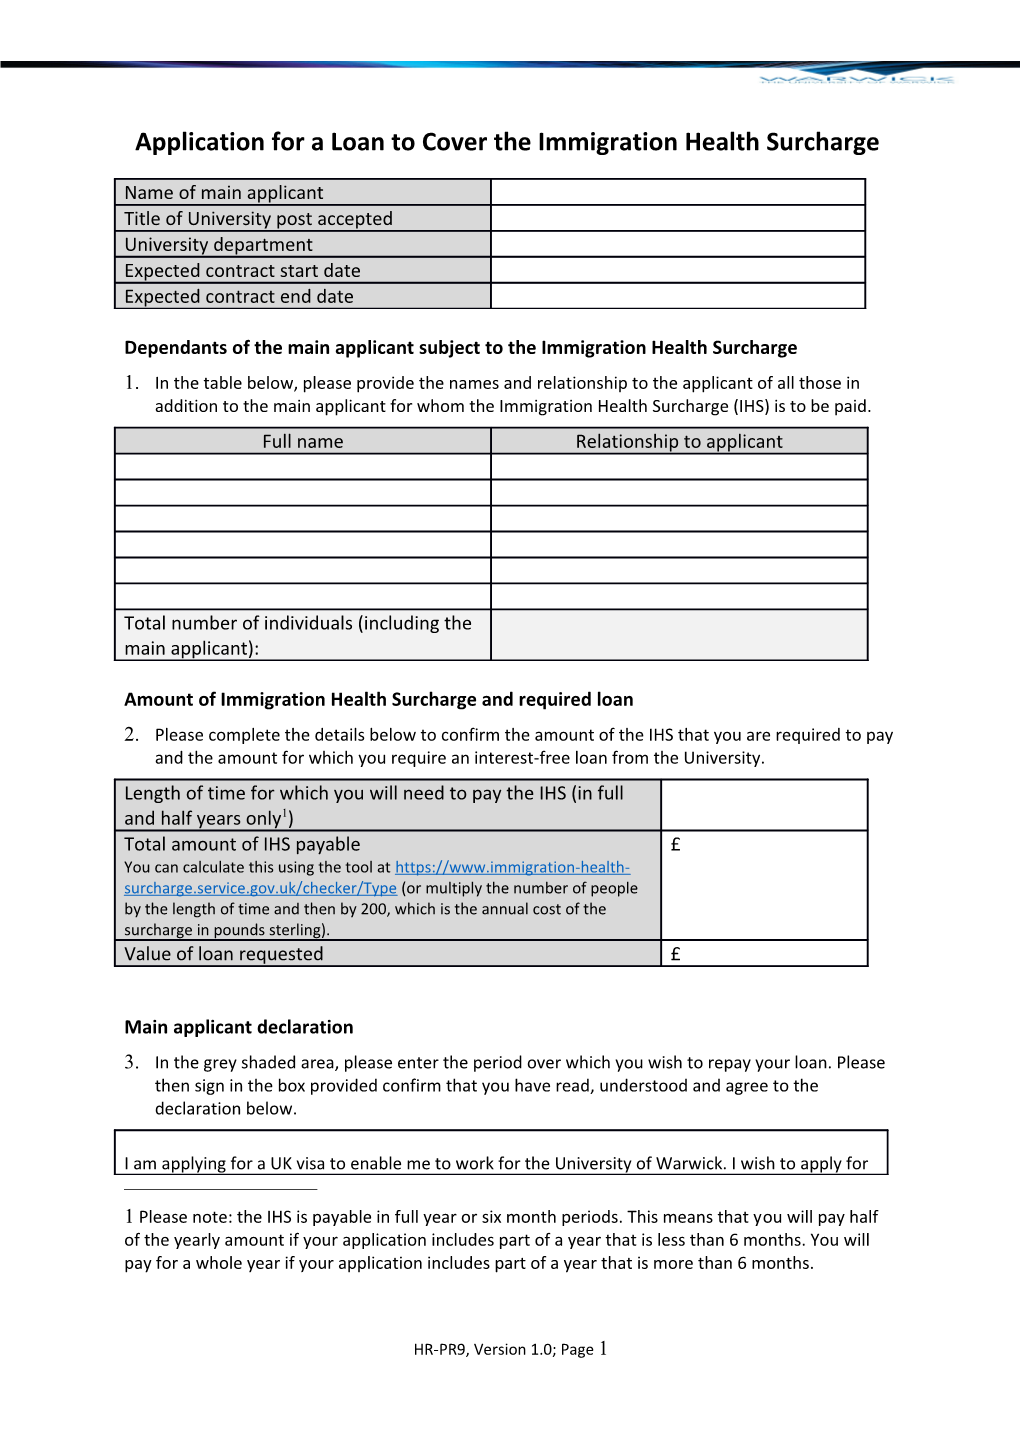 Applicationfor a Loan to Cover the Immigration Health Surcharge